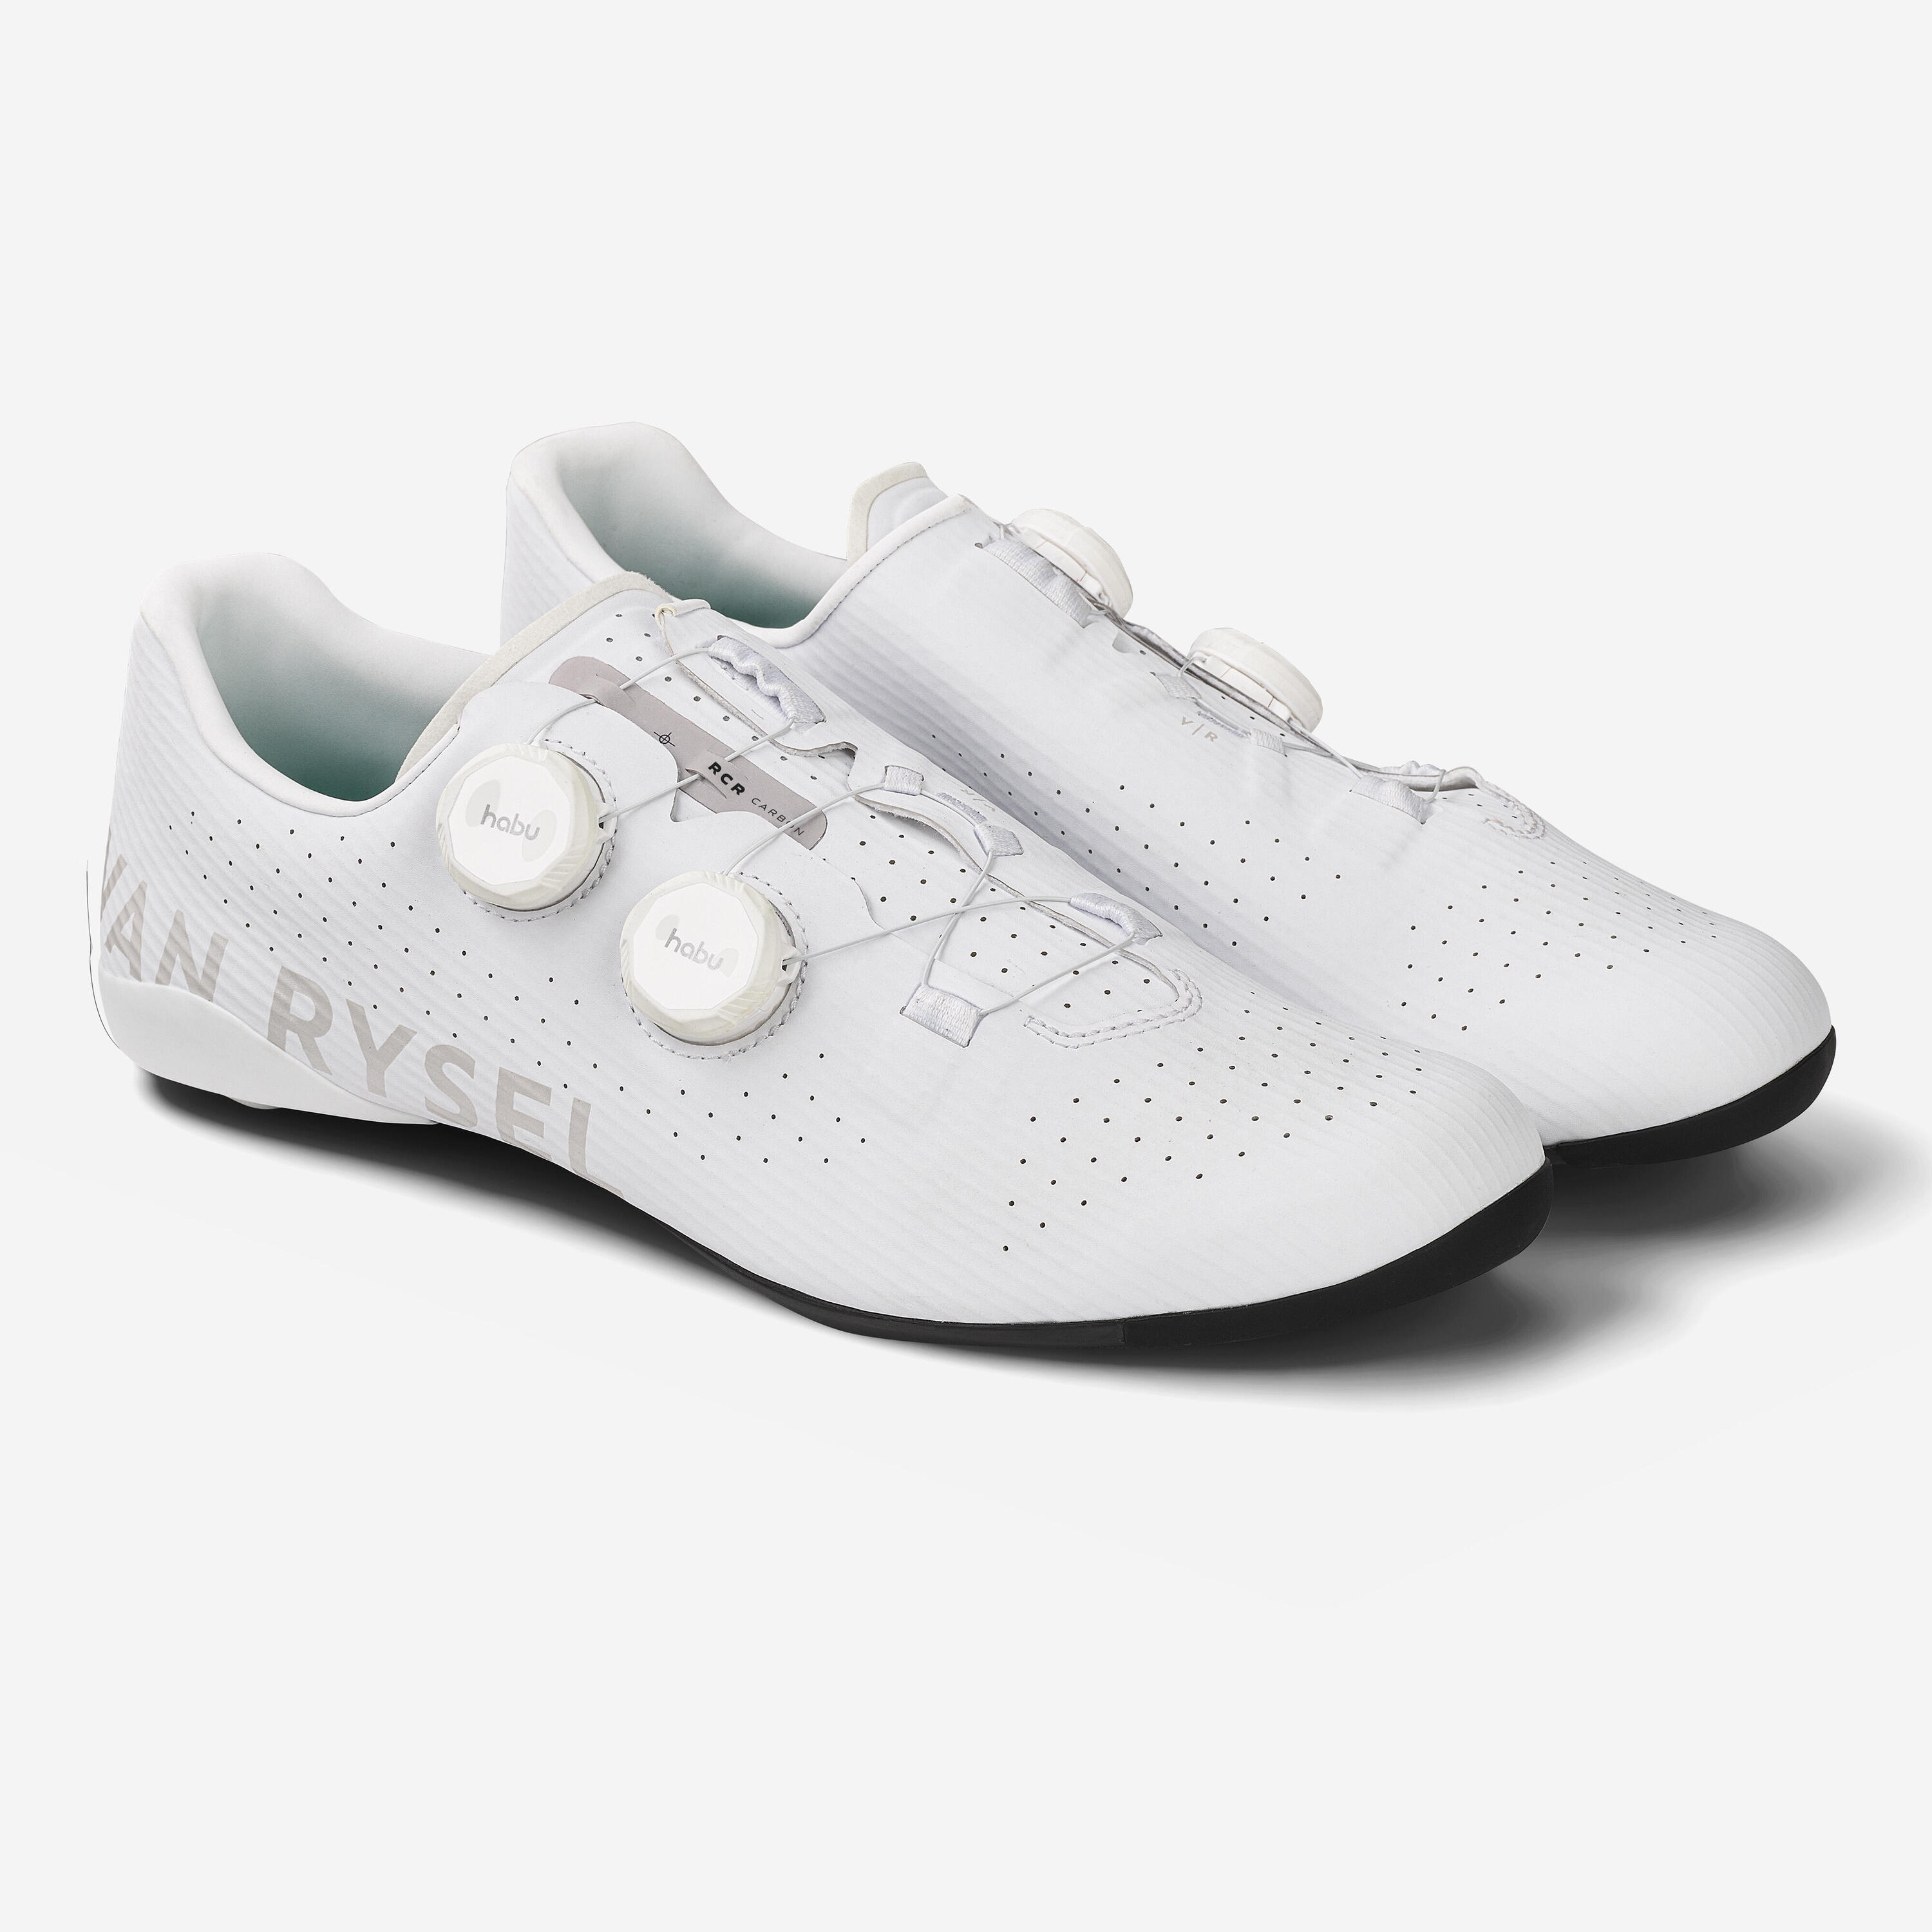 Road Cycling Shoes RCR - White 2/9